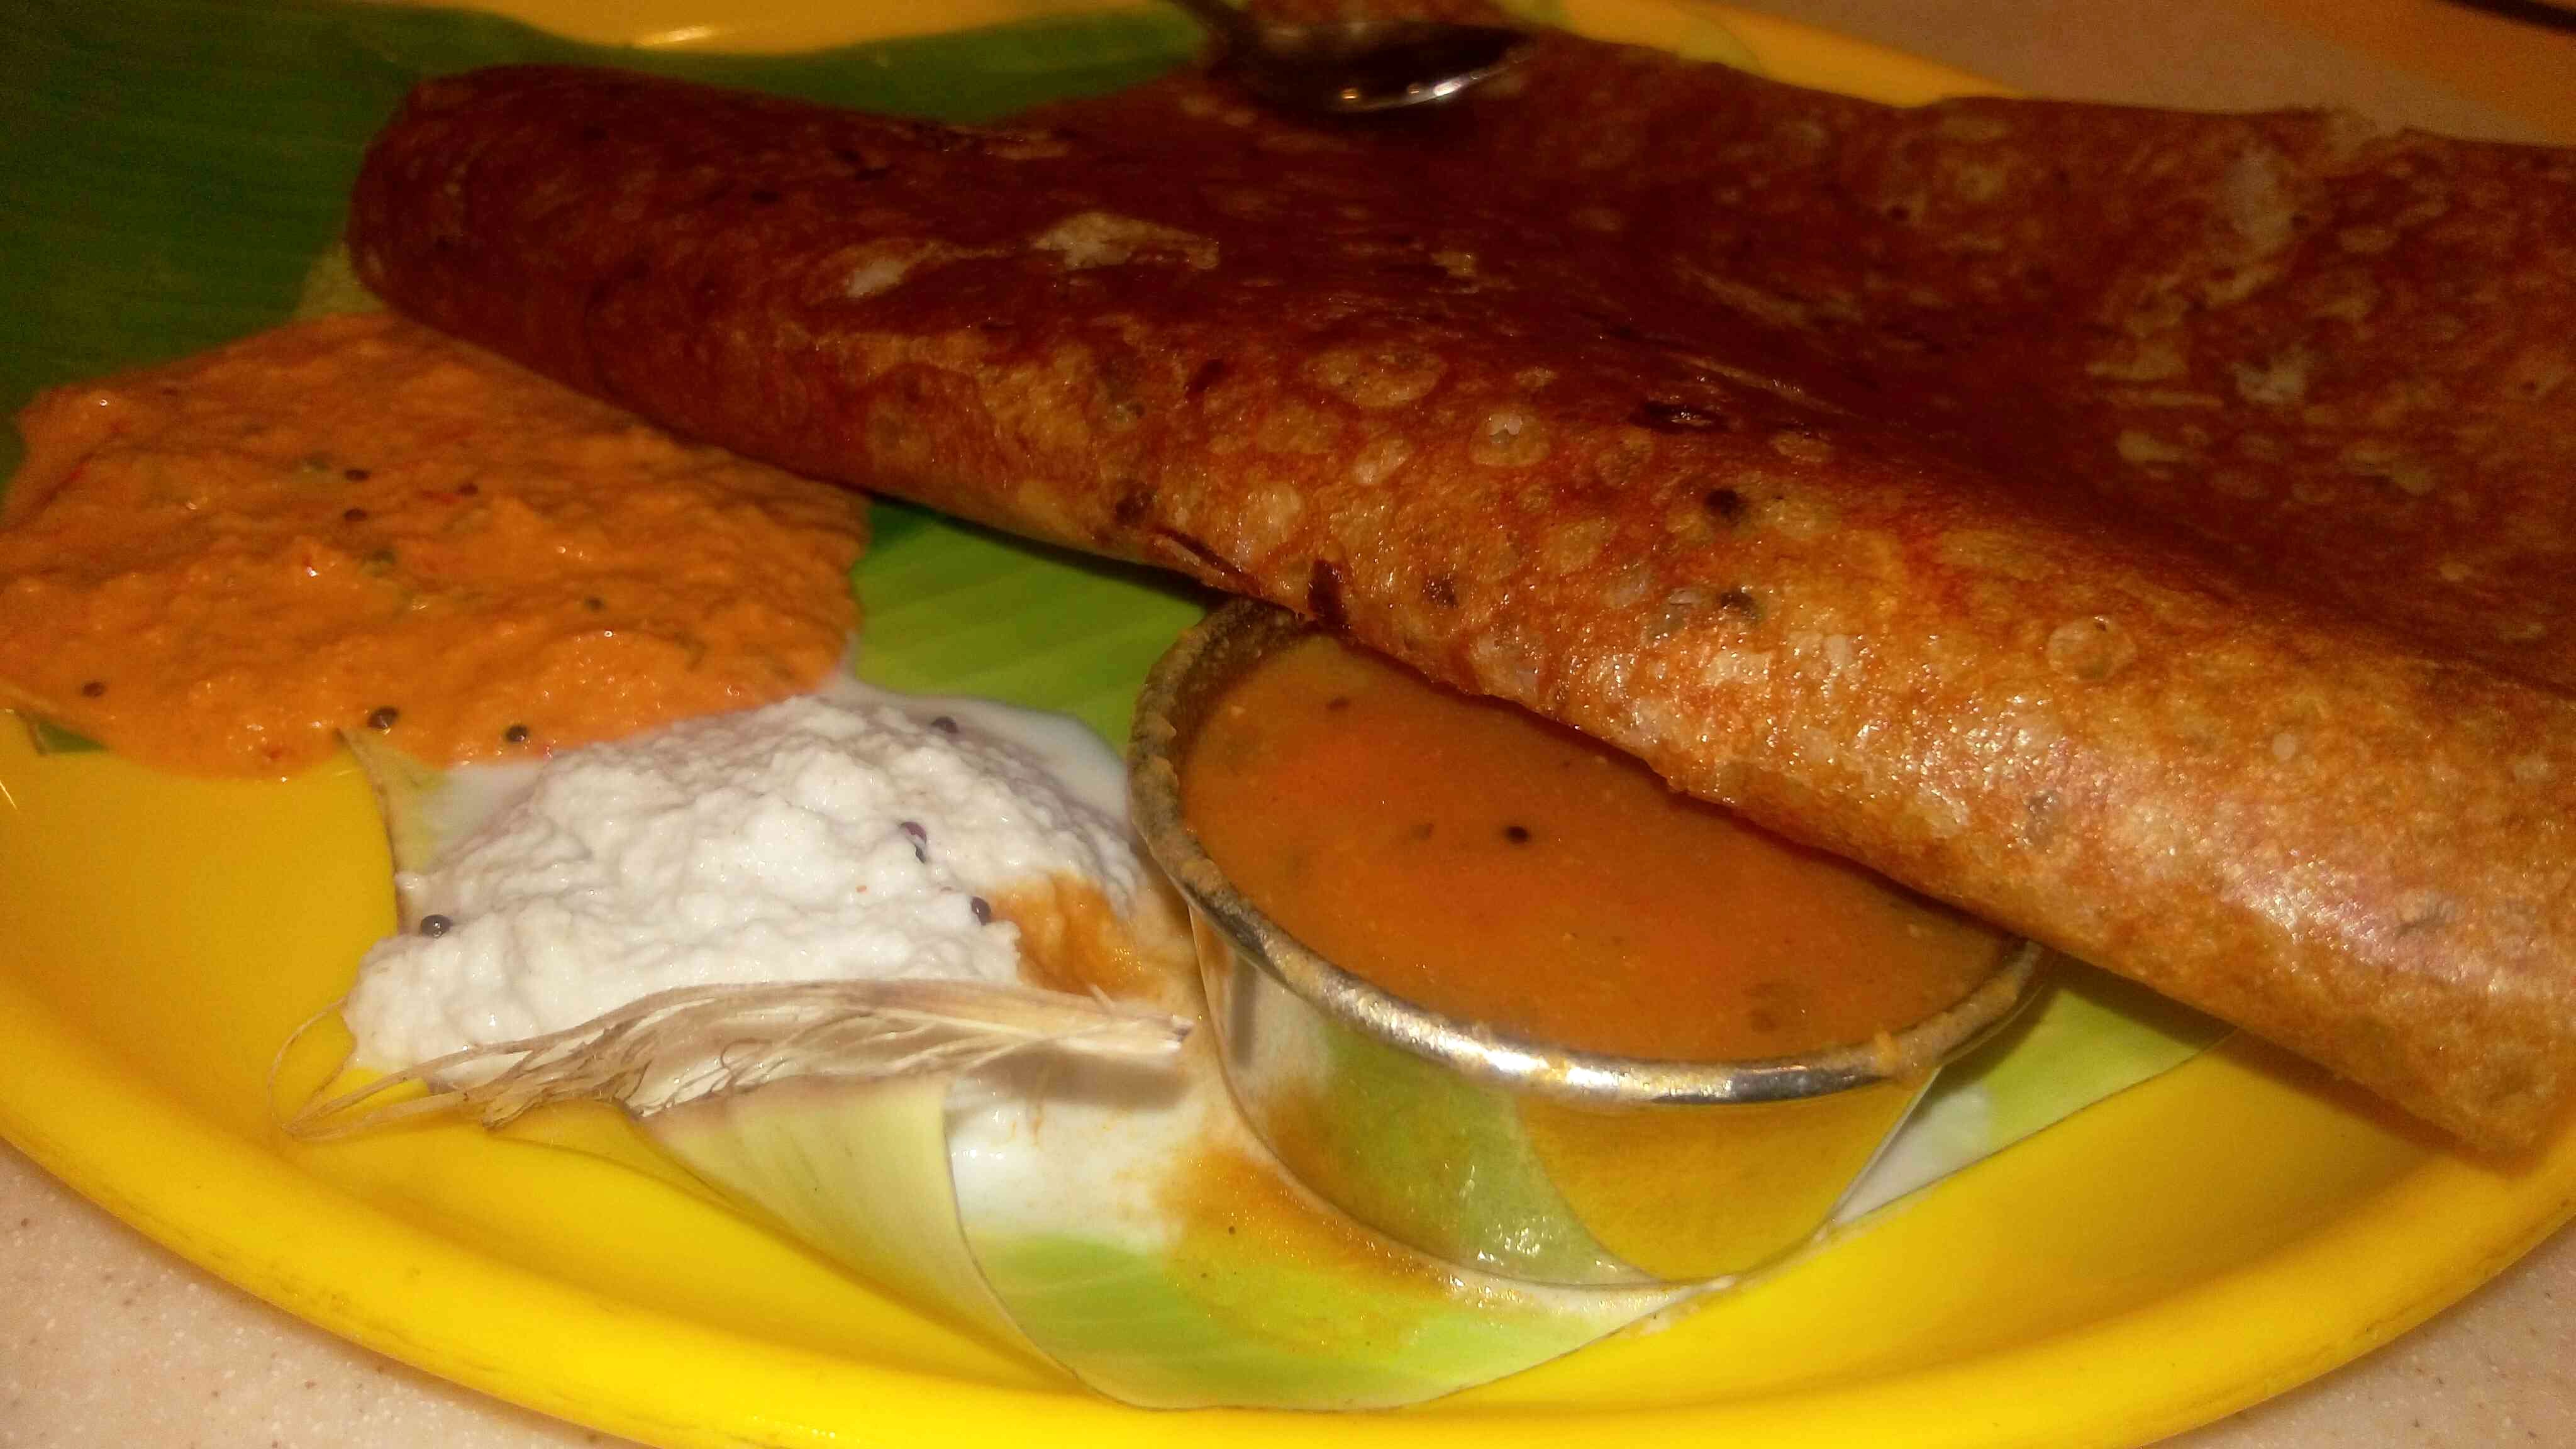 Dish,Food,Cuisine,Dosa,Ingredient,Indian cuisine,Breakfast,South Indian cuisine,Produce,Tamil food